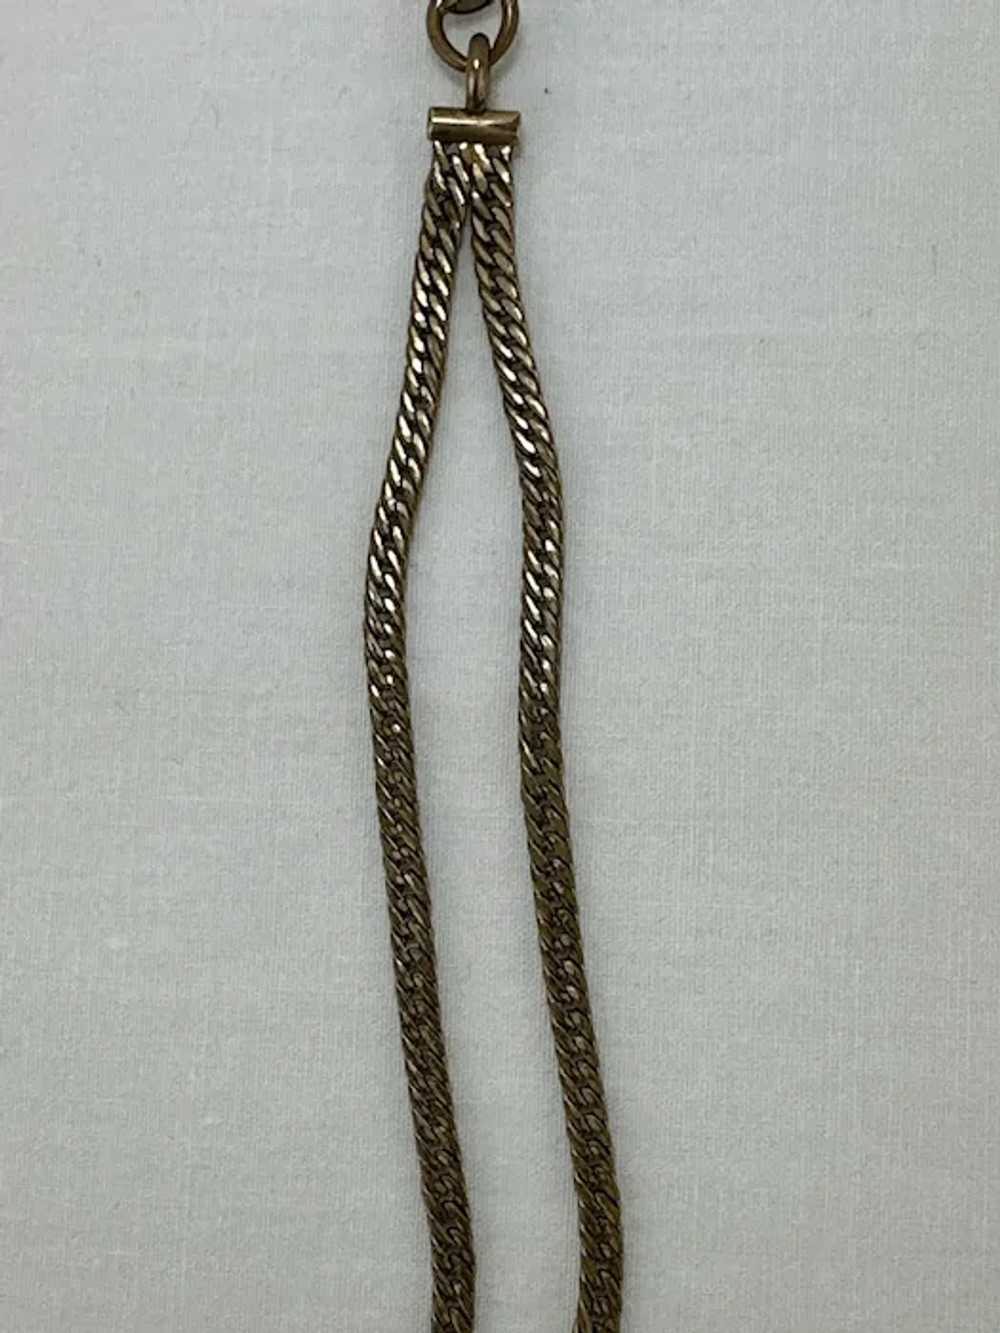 Victorian Double Chain Slide Watch Chain - image 6